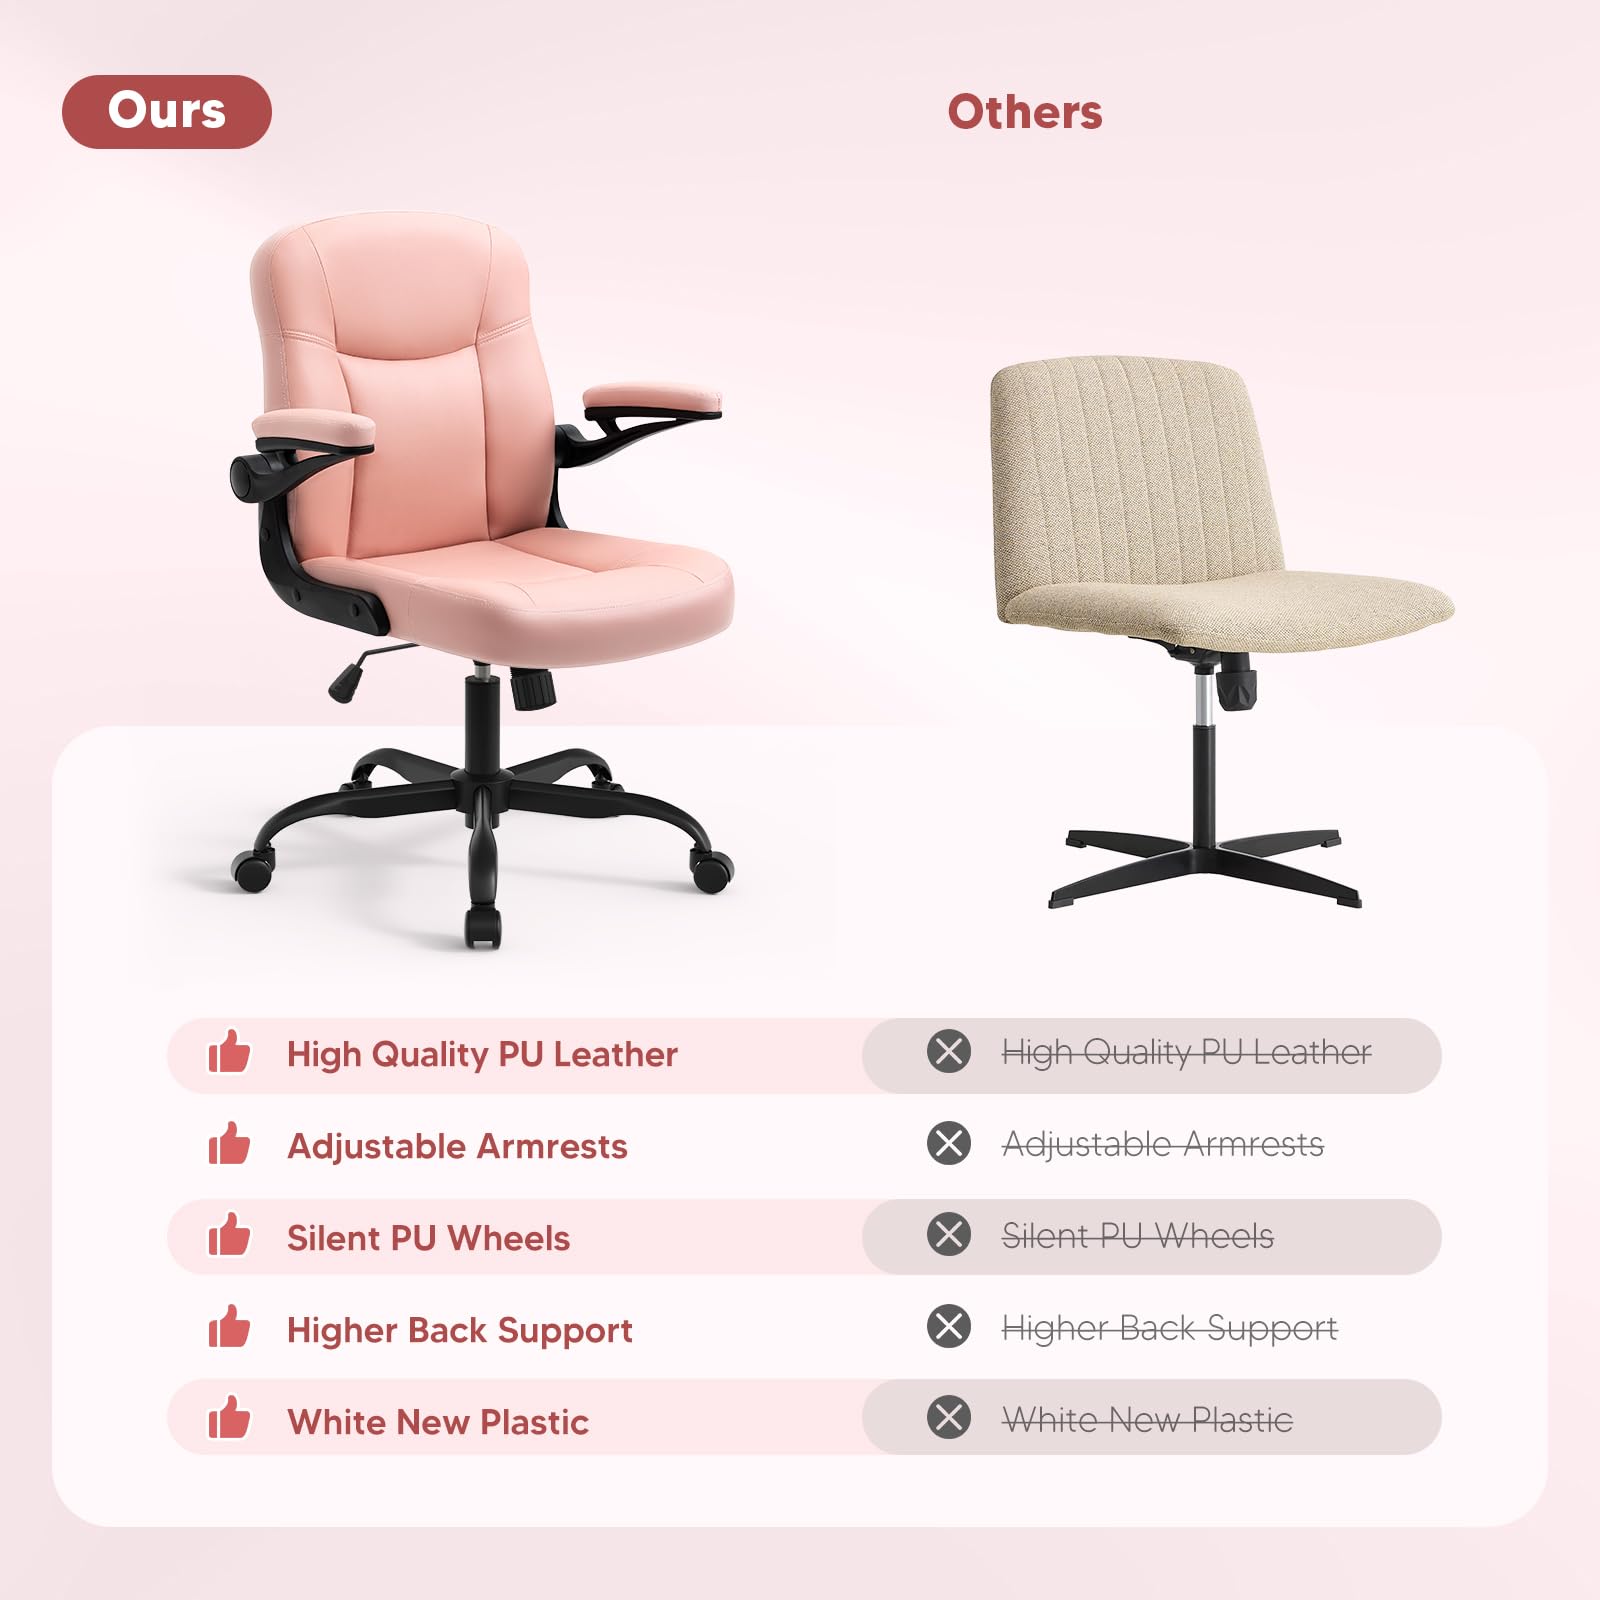 YAMASORO Executive Office Chair Pink Mid-Back Office Desk Chairs with Wheels and Flip-up Arms Leather Computer Chair for Girls,Women